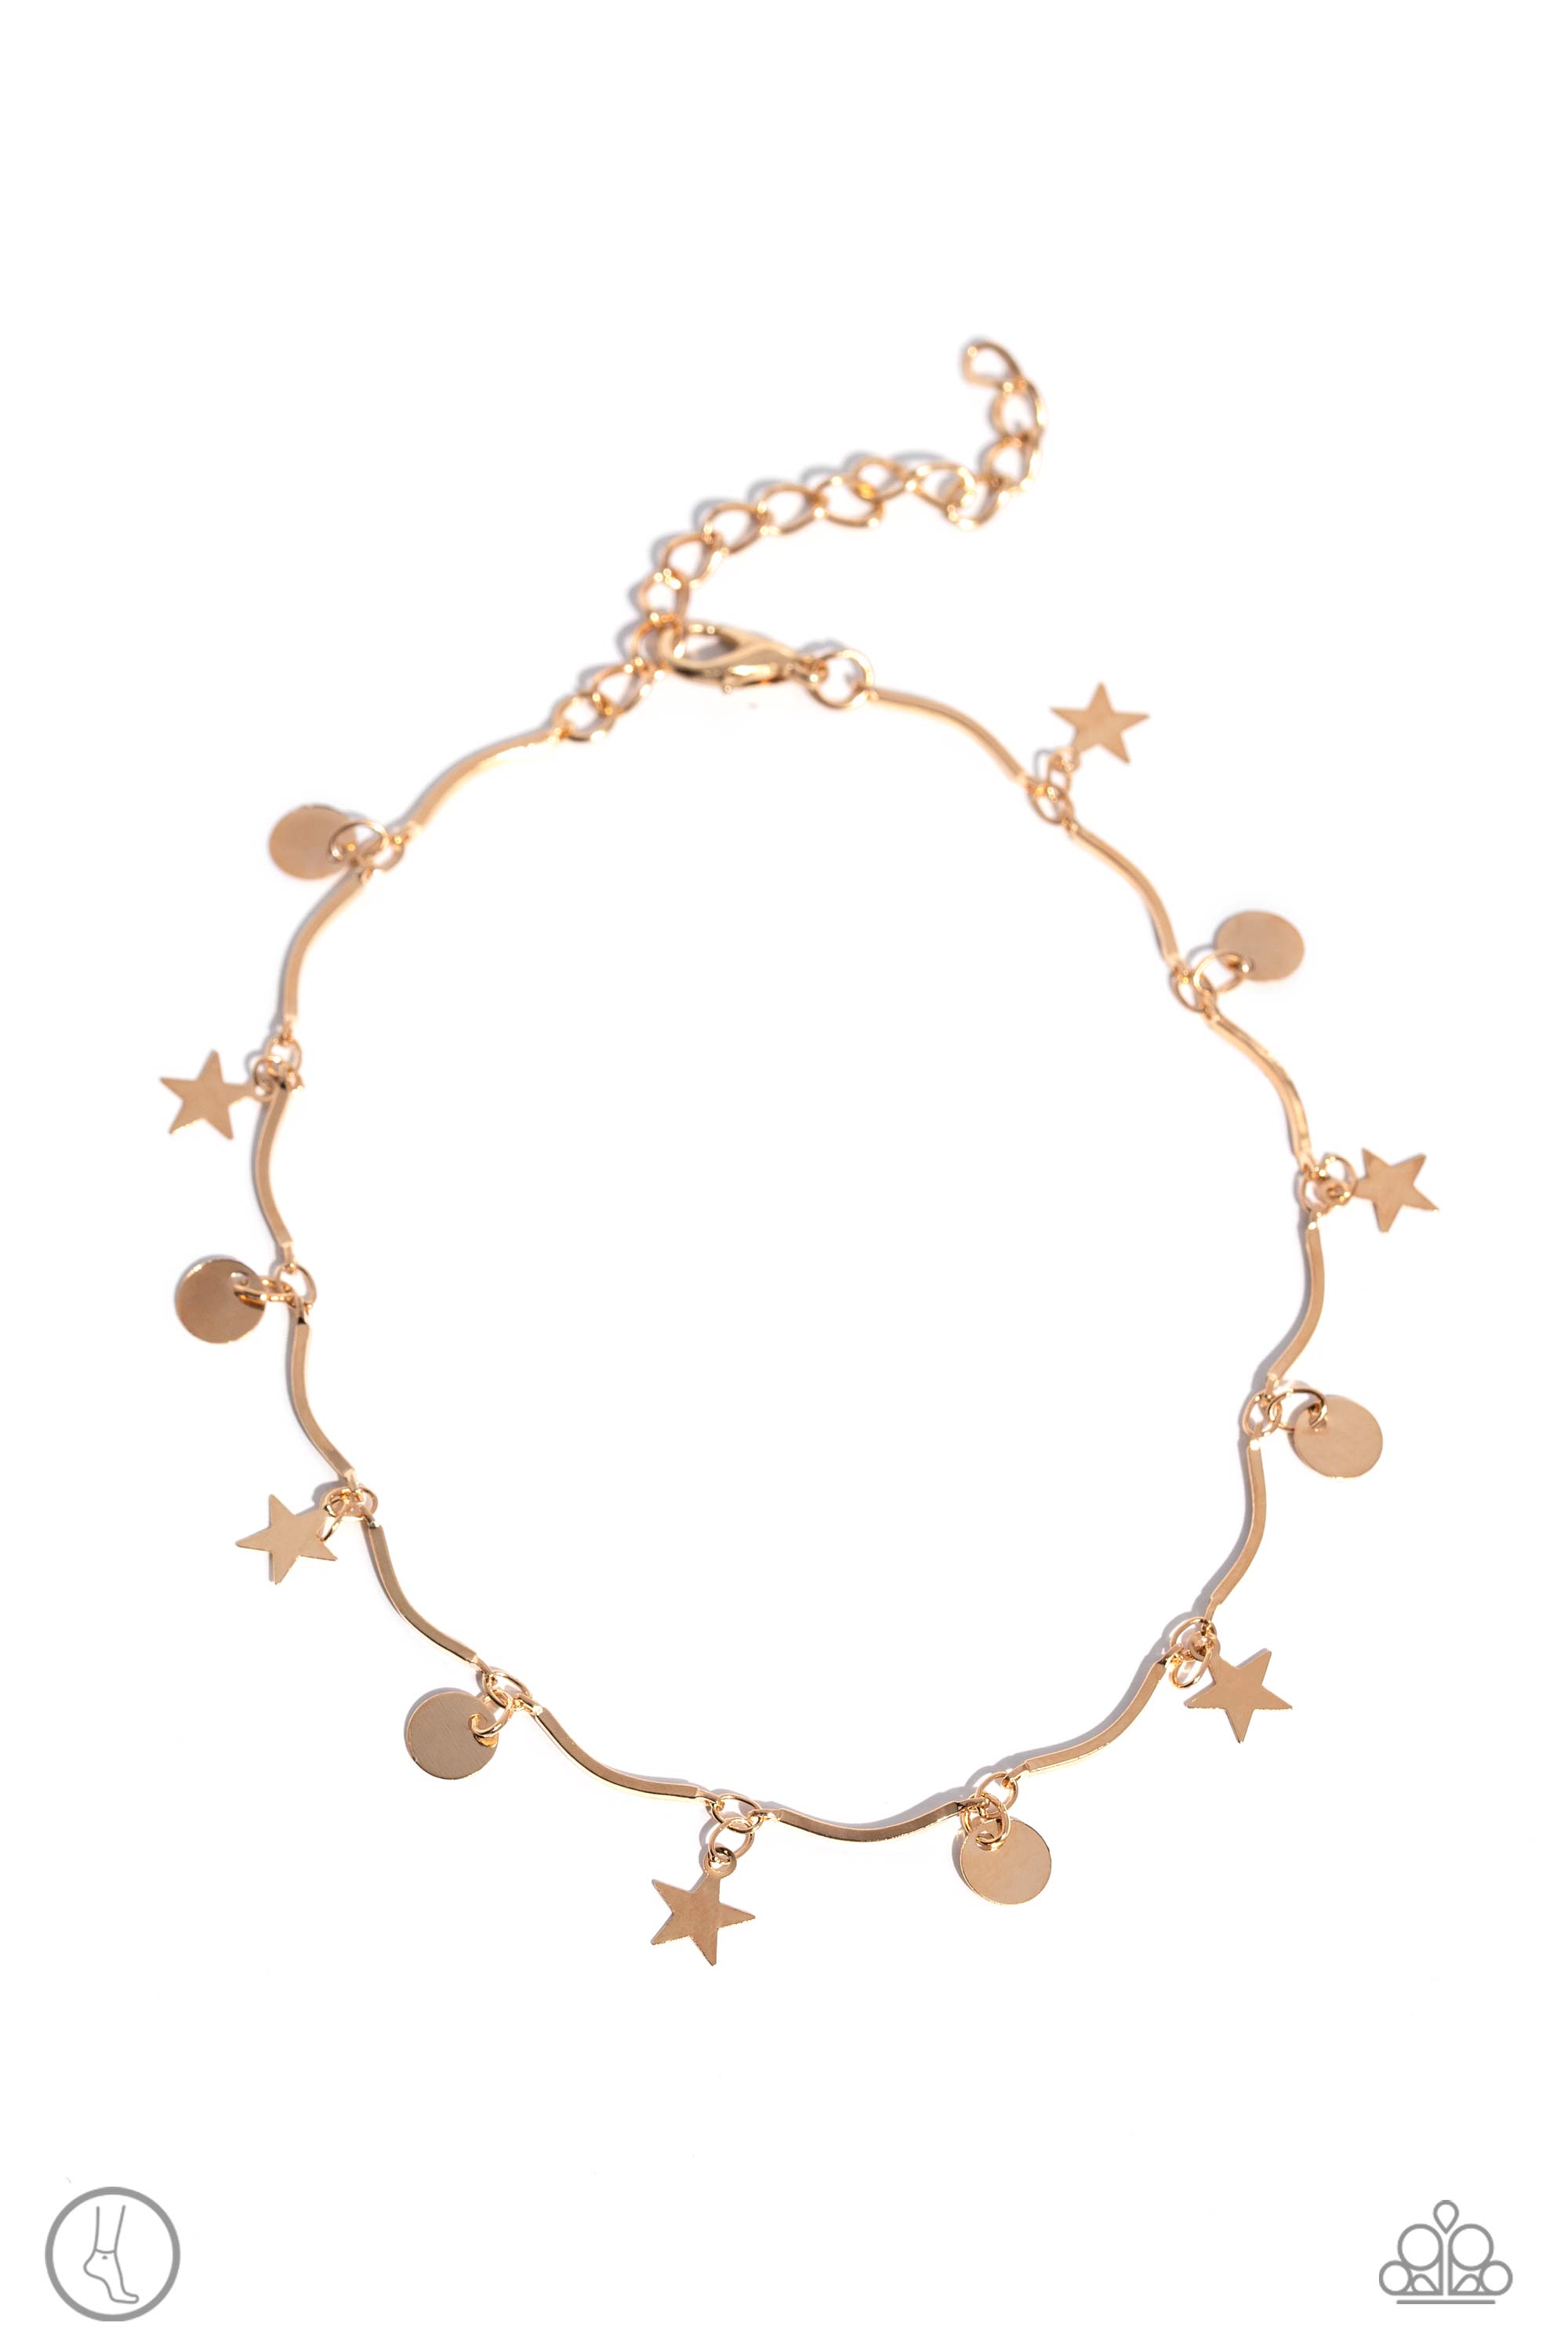 BEACH You To It Gold Anklet - Paparazzi Accessories- lightbox - CarasShop.com - $5 Jewelry by Cara Jewels